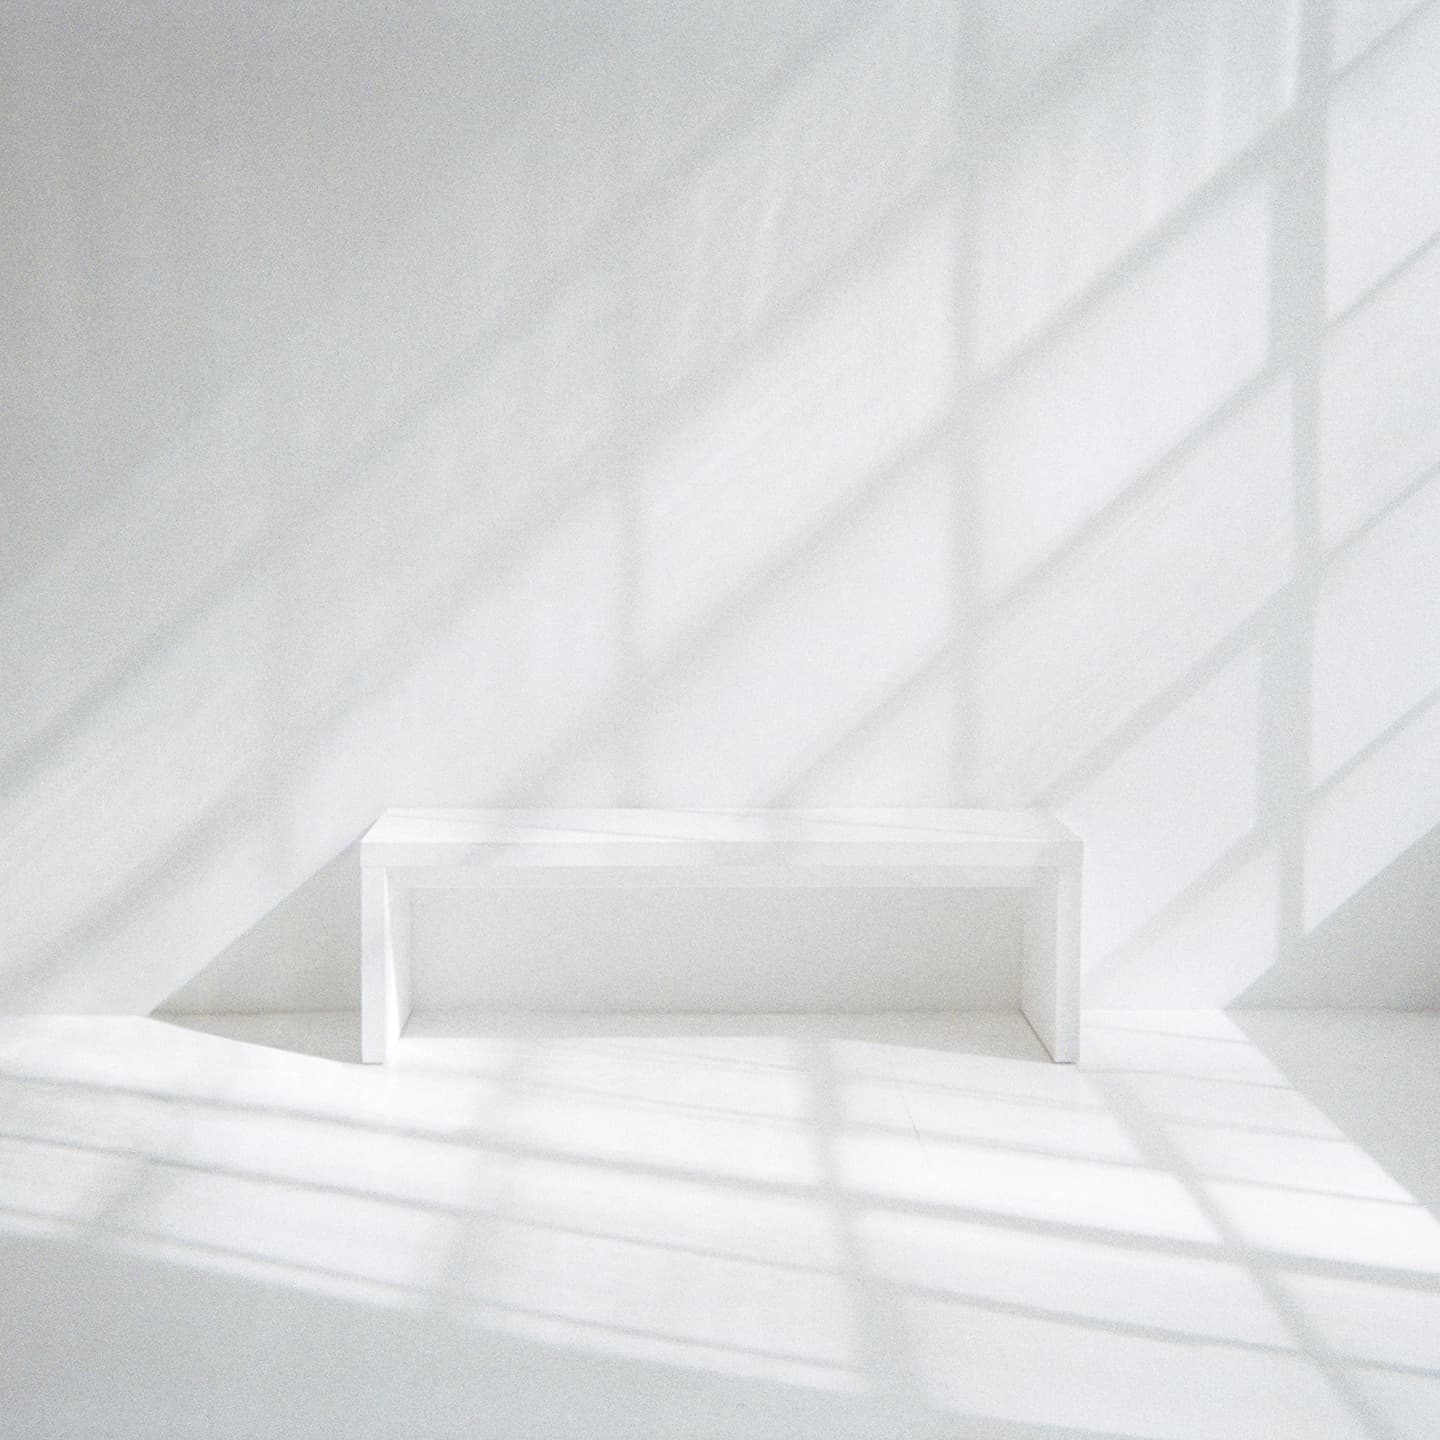 White bench in white room with sun shining against bench and wall.